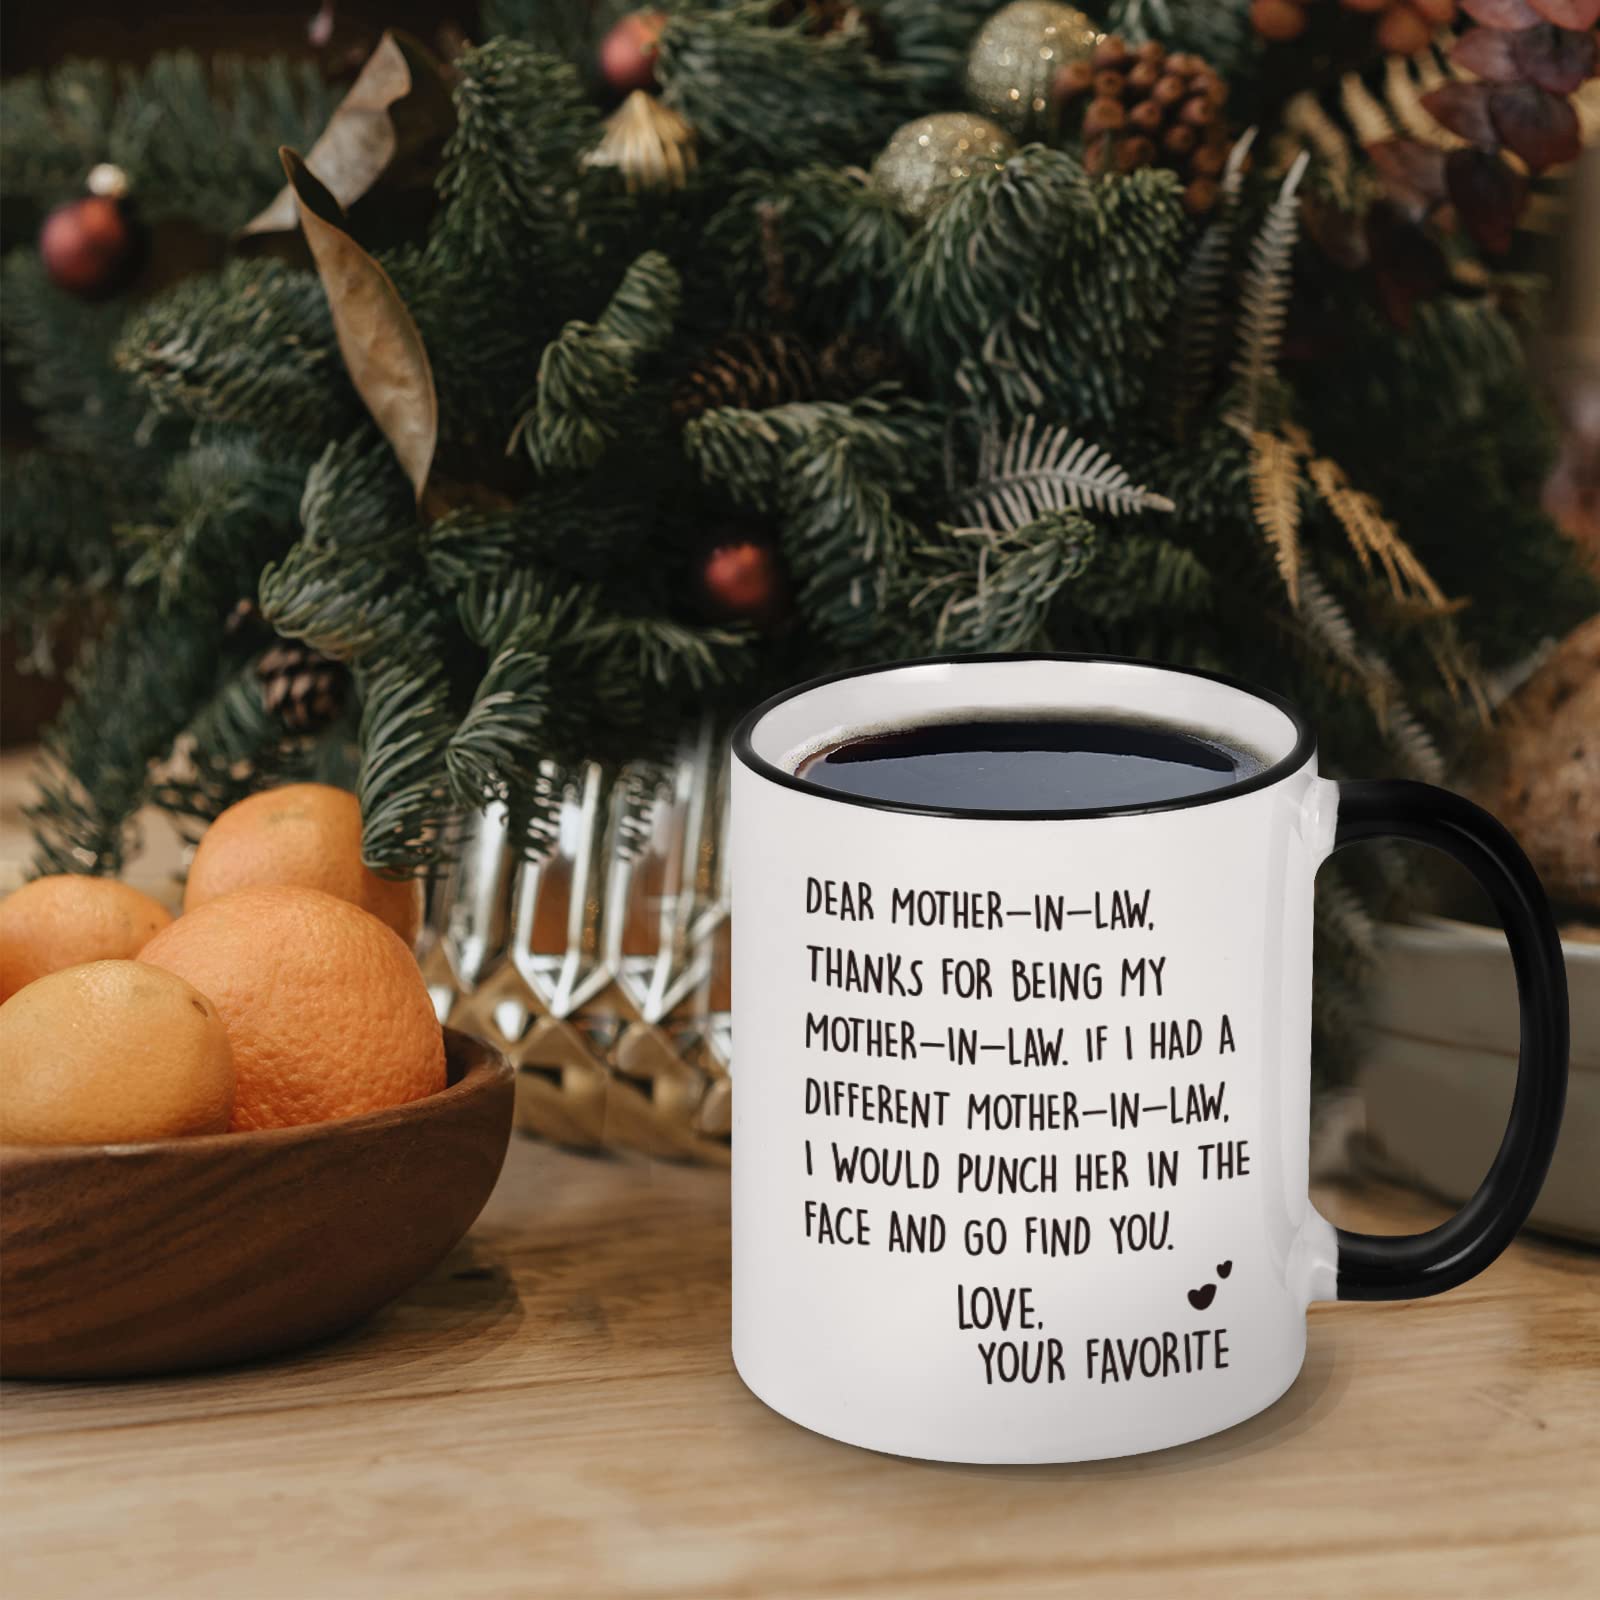 YHRJWN Christmas Mothers Day Gifts from Daughter in Law, Dear Mother in Law Coffee Mug, Mother in Law Gifts from Daughter in Law, Birthday Mother's Day Gifts for Mother in Law, 11 Oz White